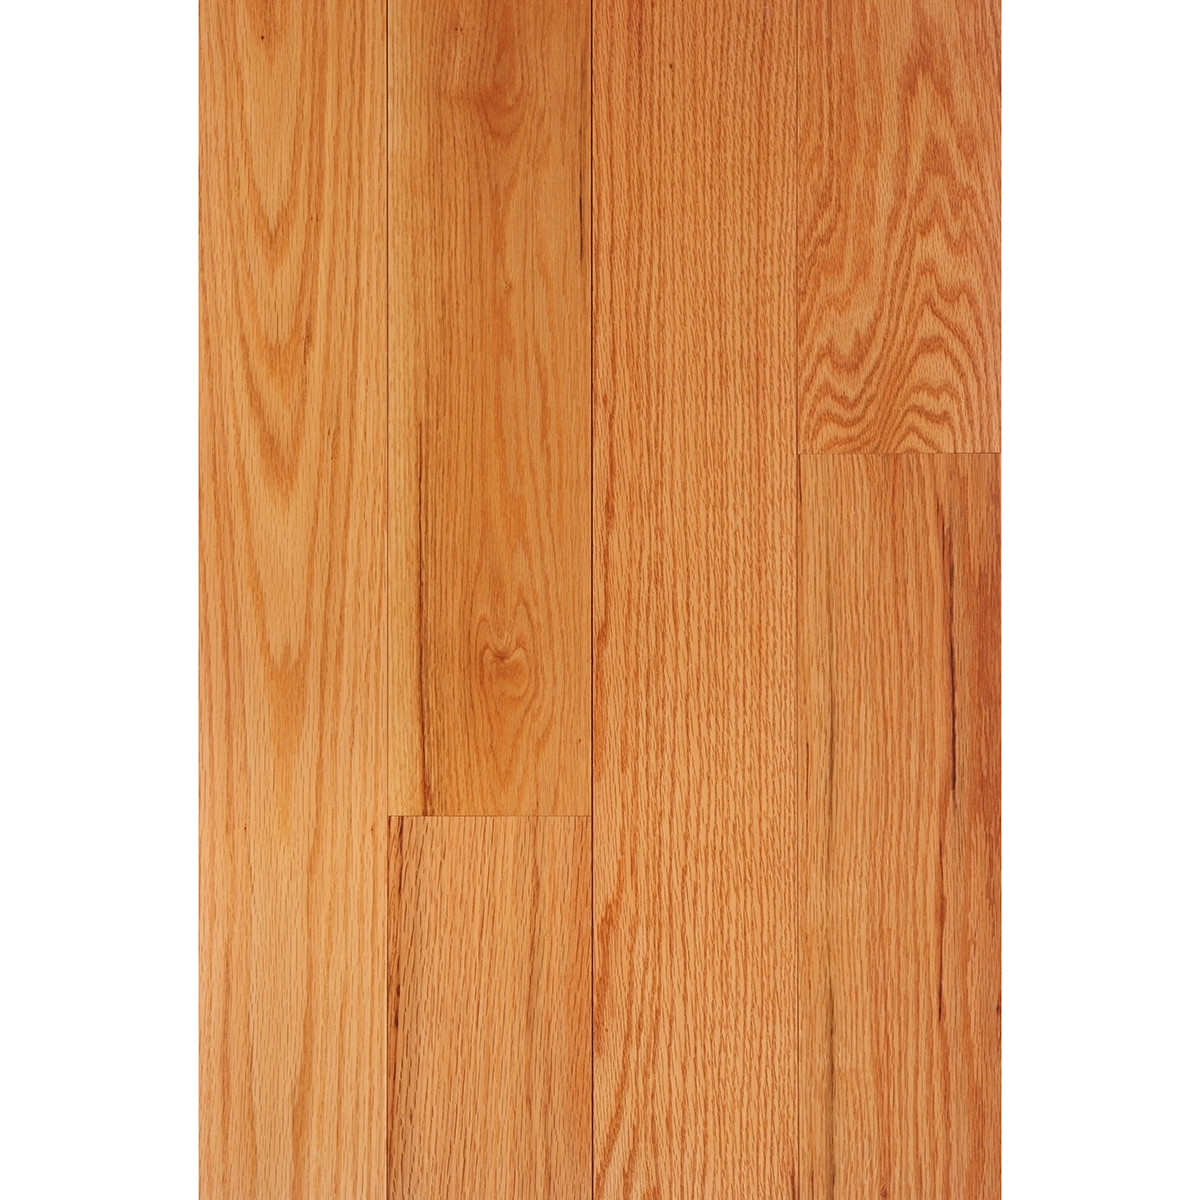 23 Recommended 3 4 Cherry Hardwood Flooring 2024 free download 3 4 cherry hardwood flooring of red oak 3 4 x 5 select grade flooring with regard to prefinished clear semi gloss 3 4